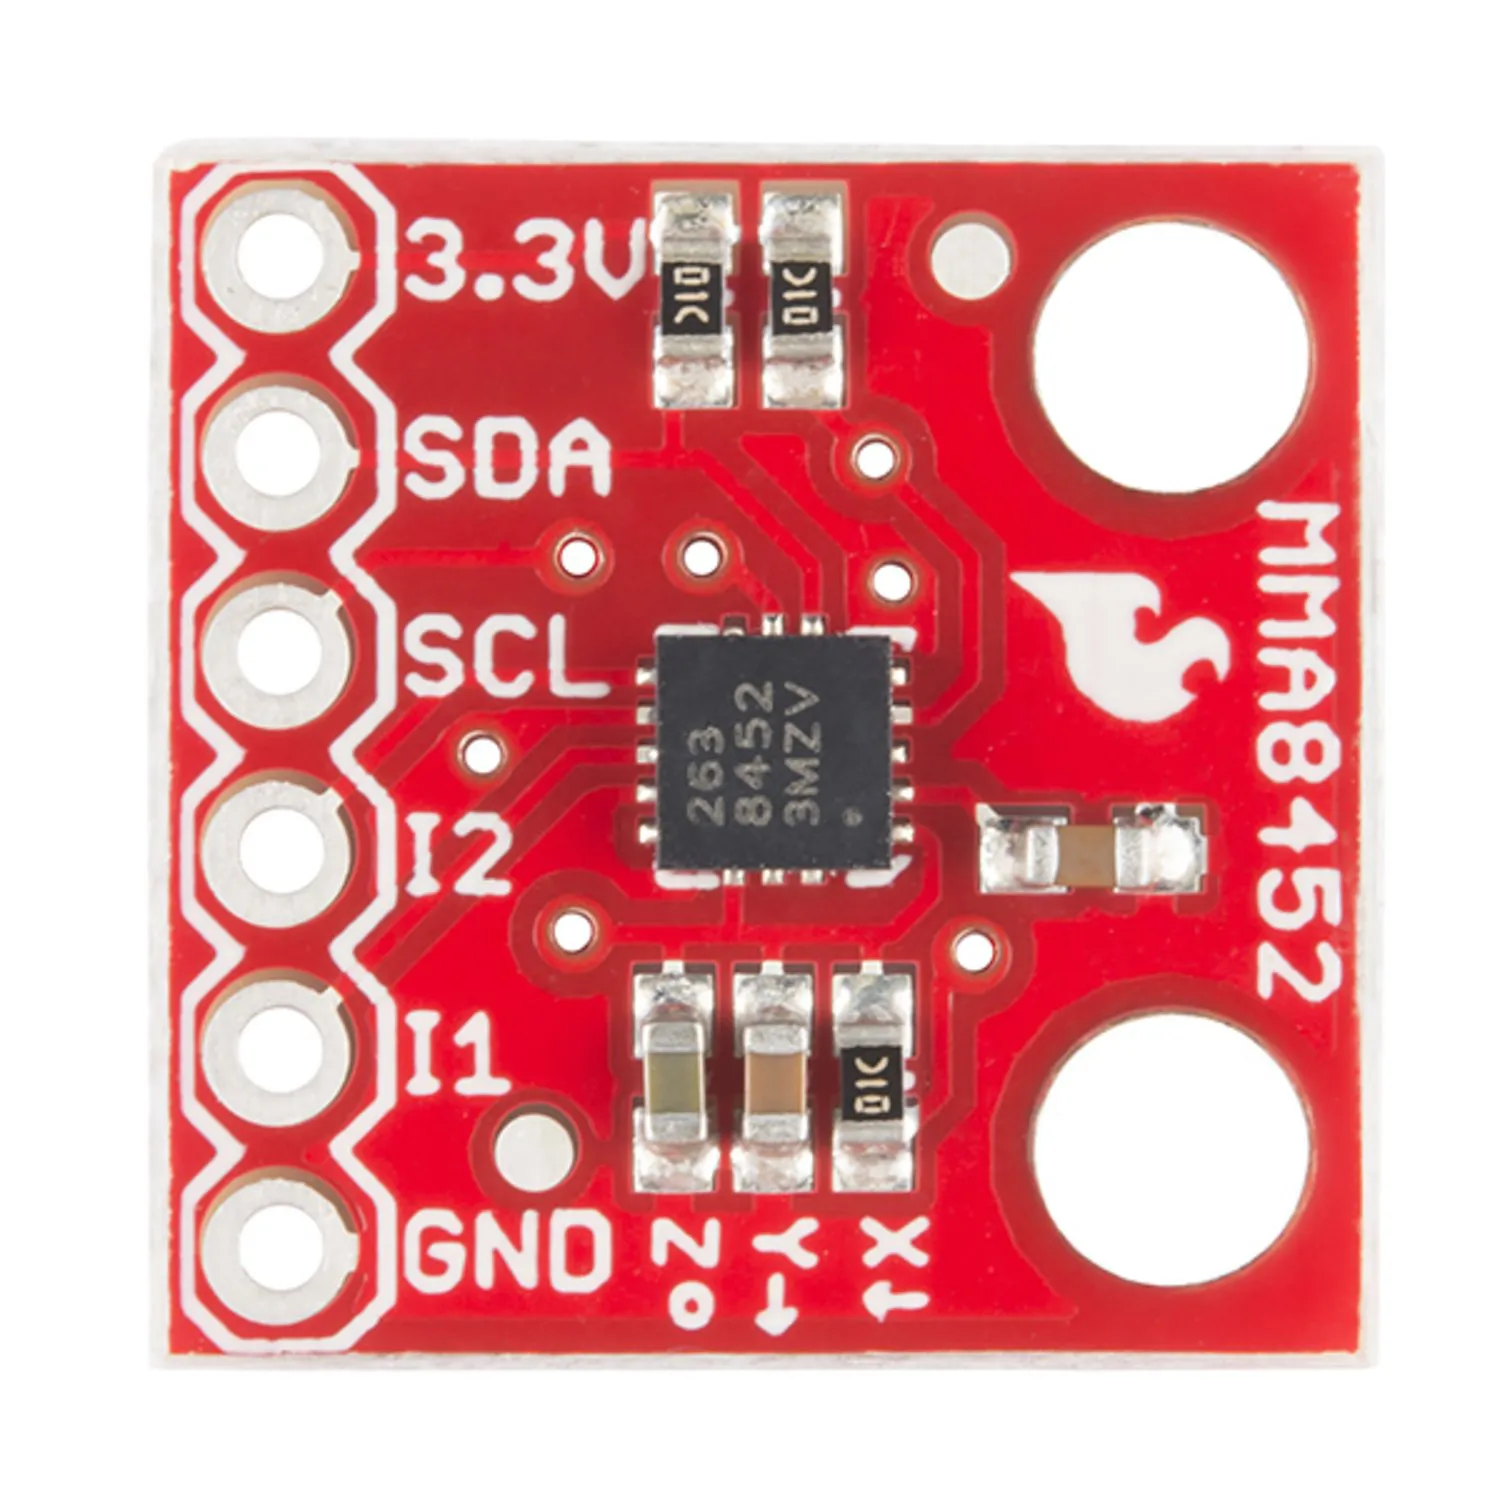 Photo of SparkFun Triple Axis Accelerometer Breakout - MMA8452Q